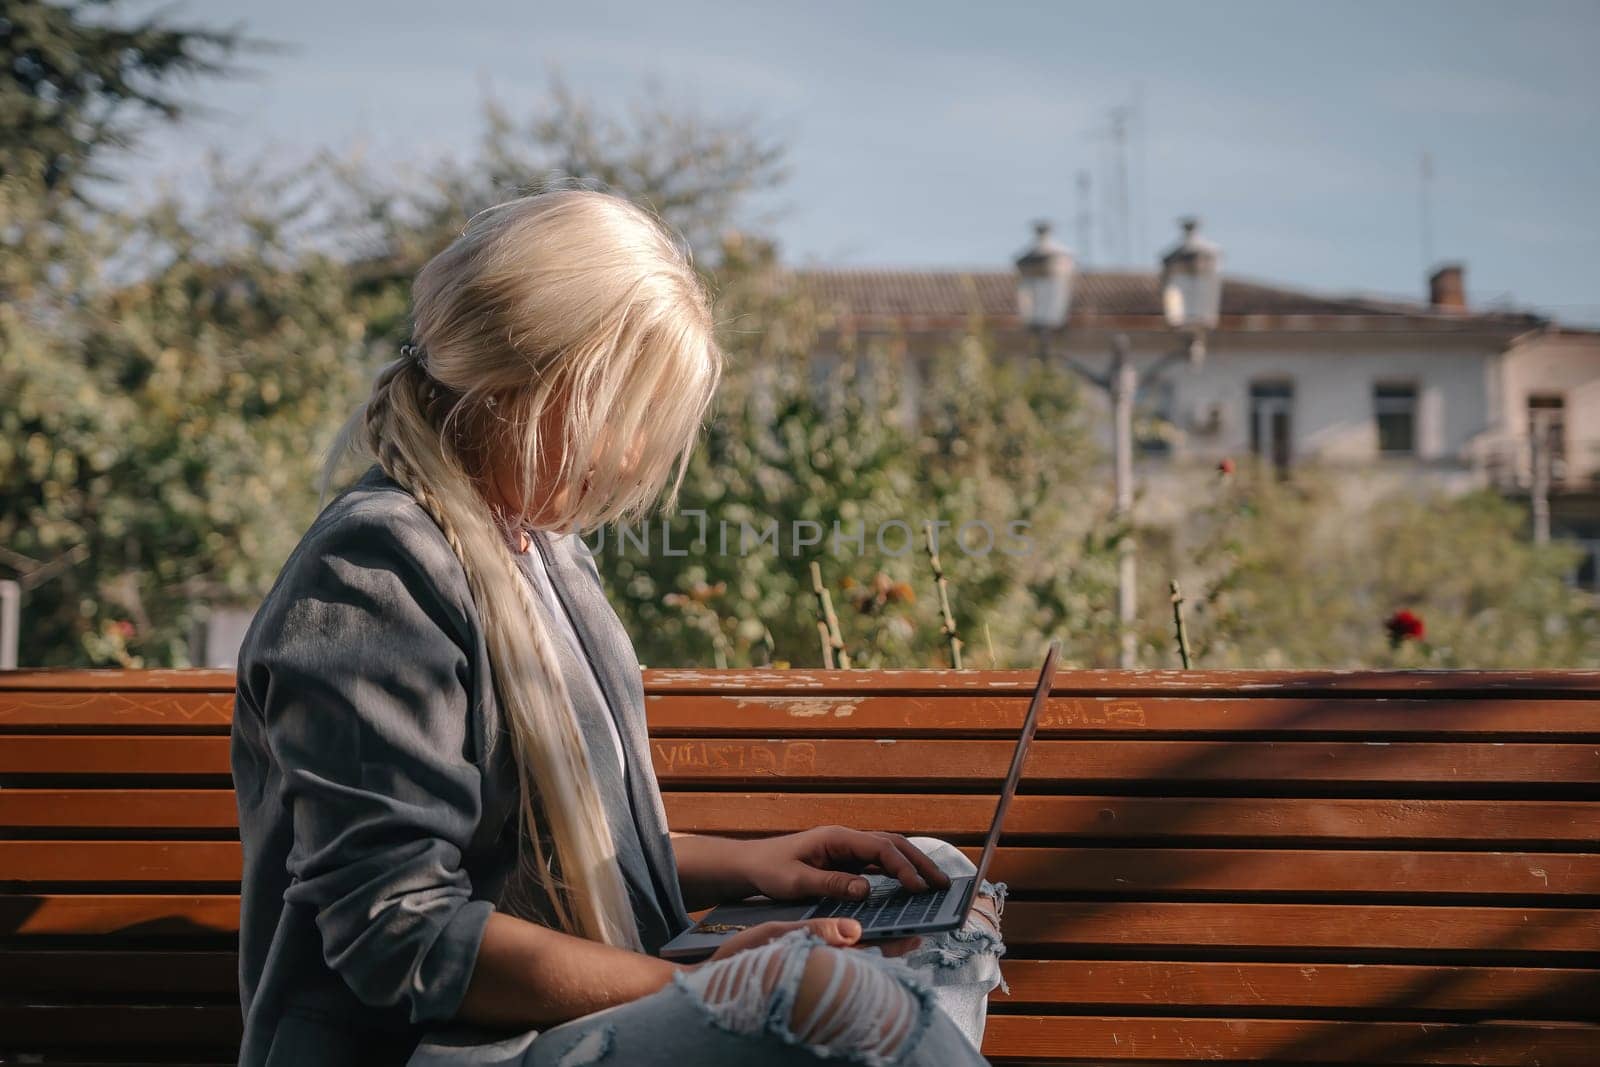 A blonde woman sits on a bench with a laptop open in front of her. She is wearing a gray jacket and has her hair in a ponytail. The scene suggests a casual and relaxed atmosphere. by Matiunina